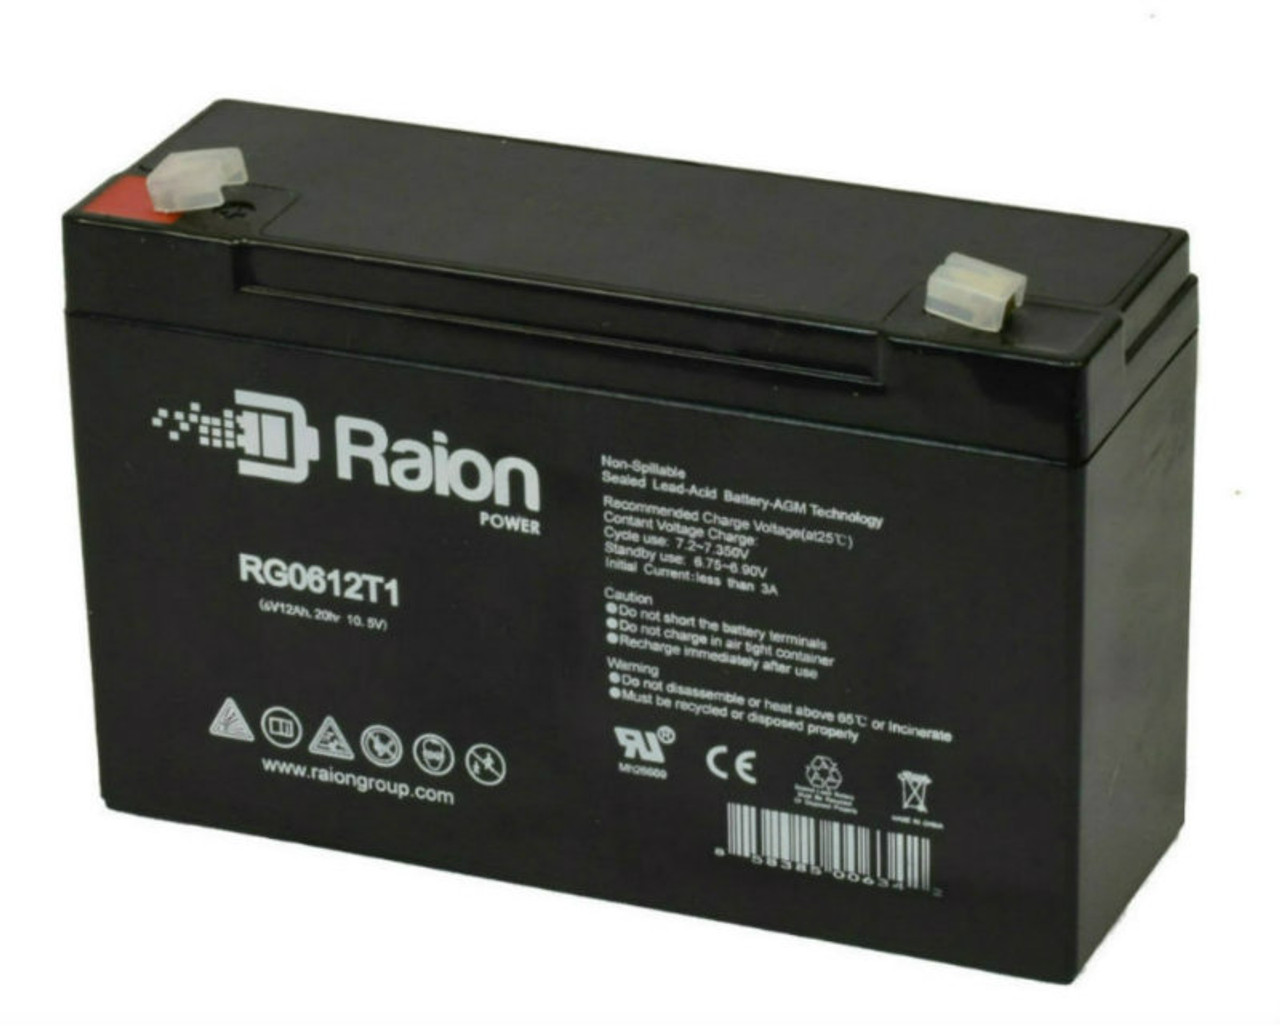 Raion Power RG06120T1 Replacement Battery for CooPower CP6-12